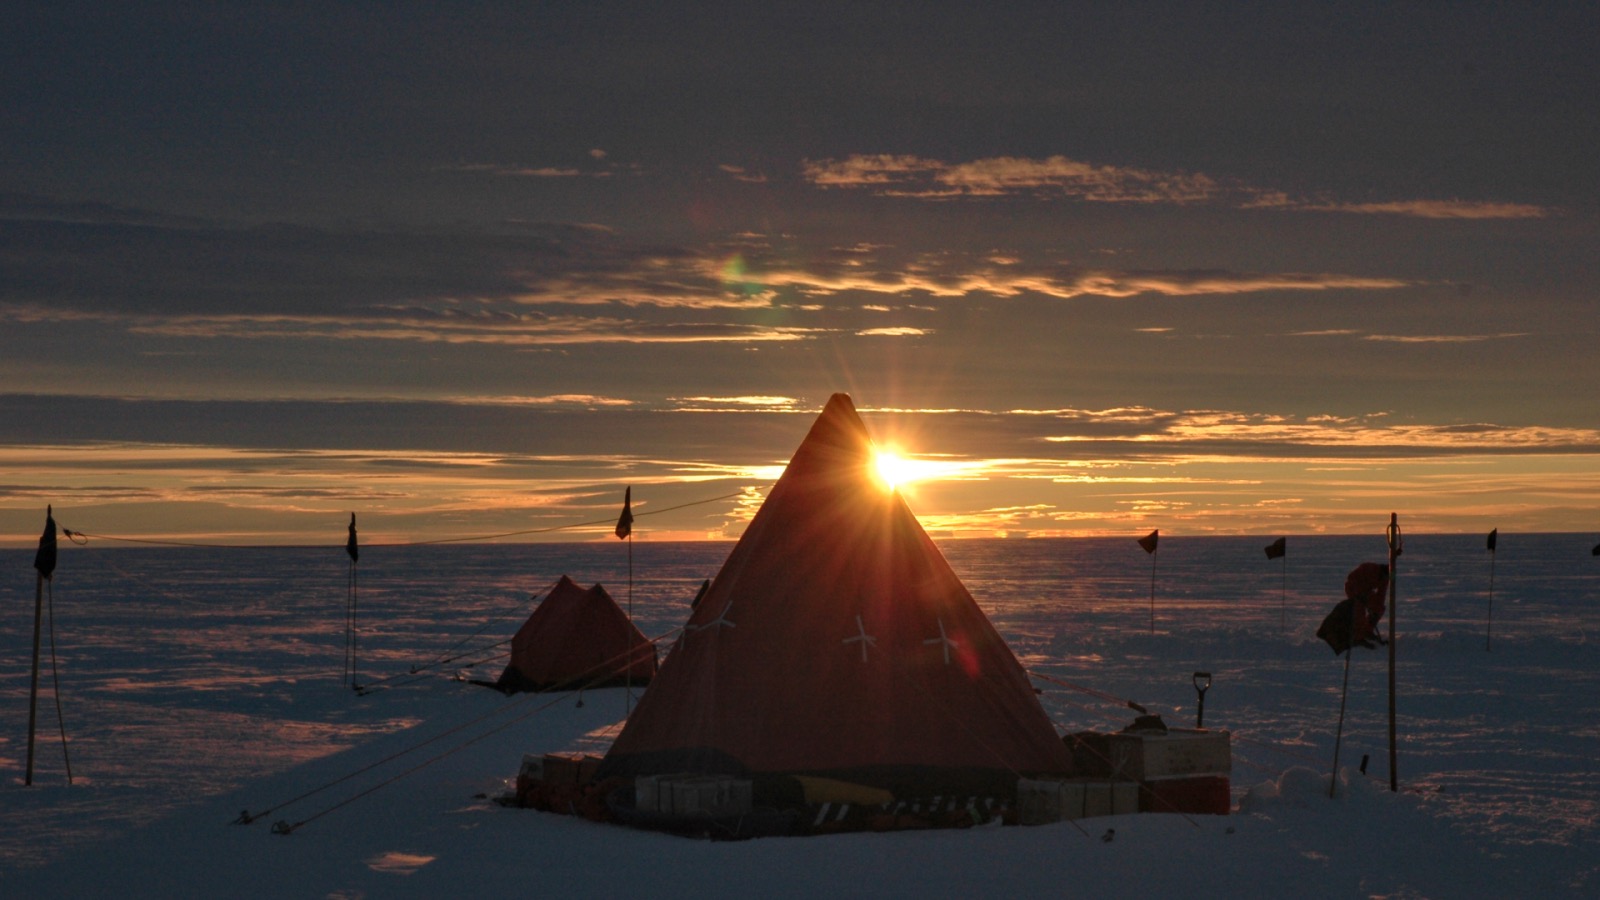 Sunset over a tent in the arctic.